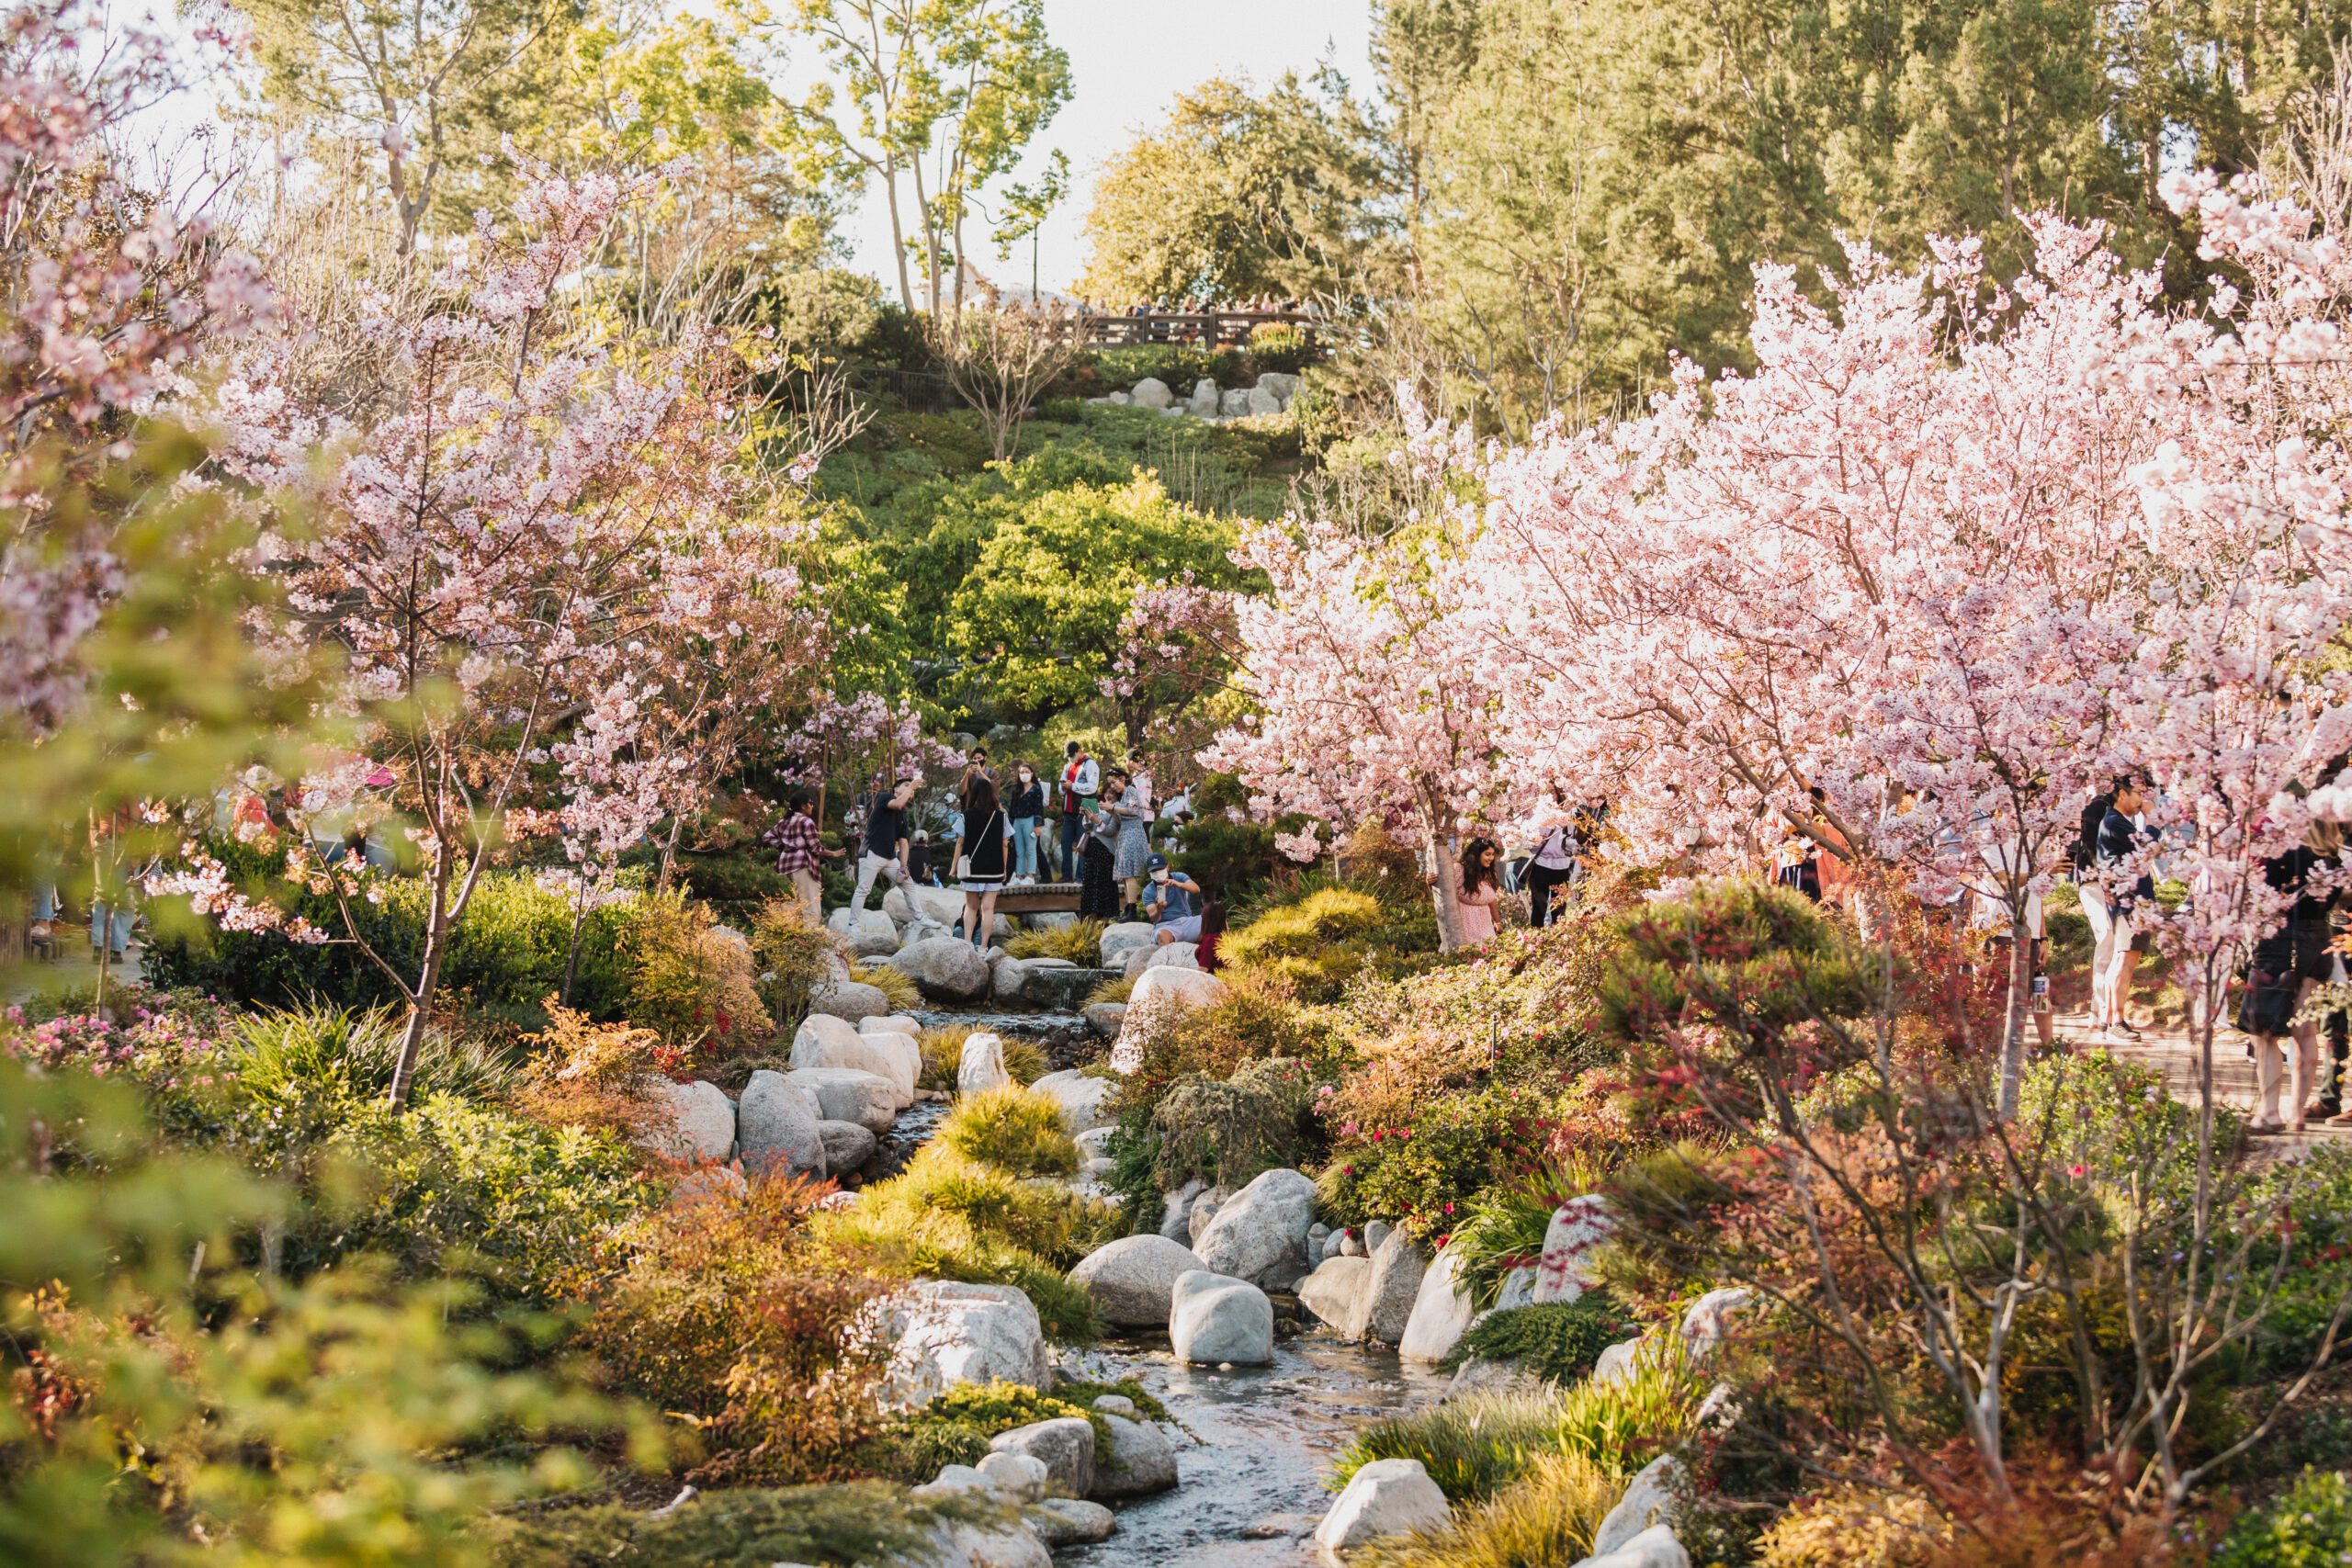 A group of people taking photos with their phones overlooking a stream surrounded by cherry blossom trees.